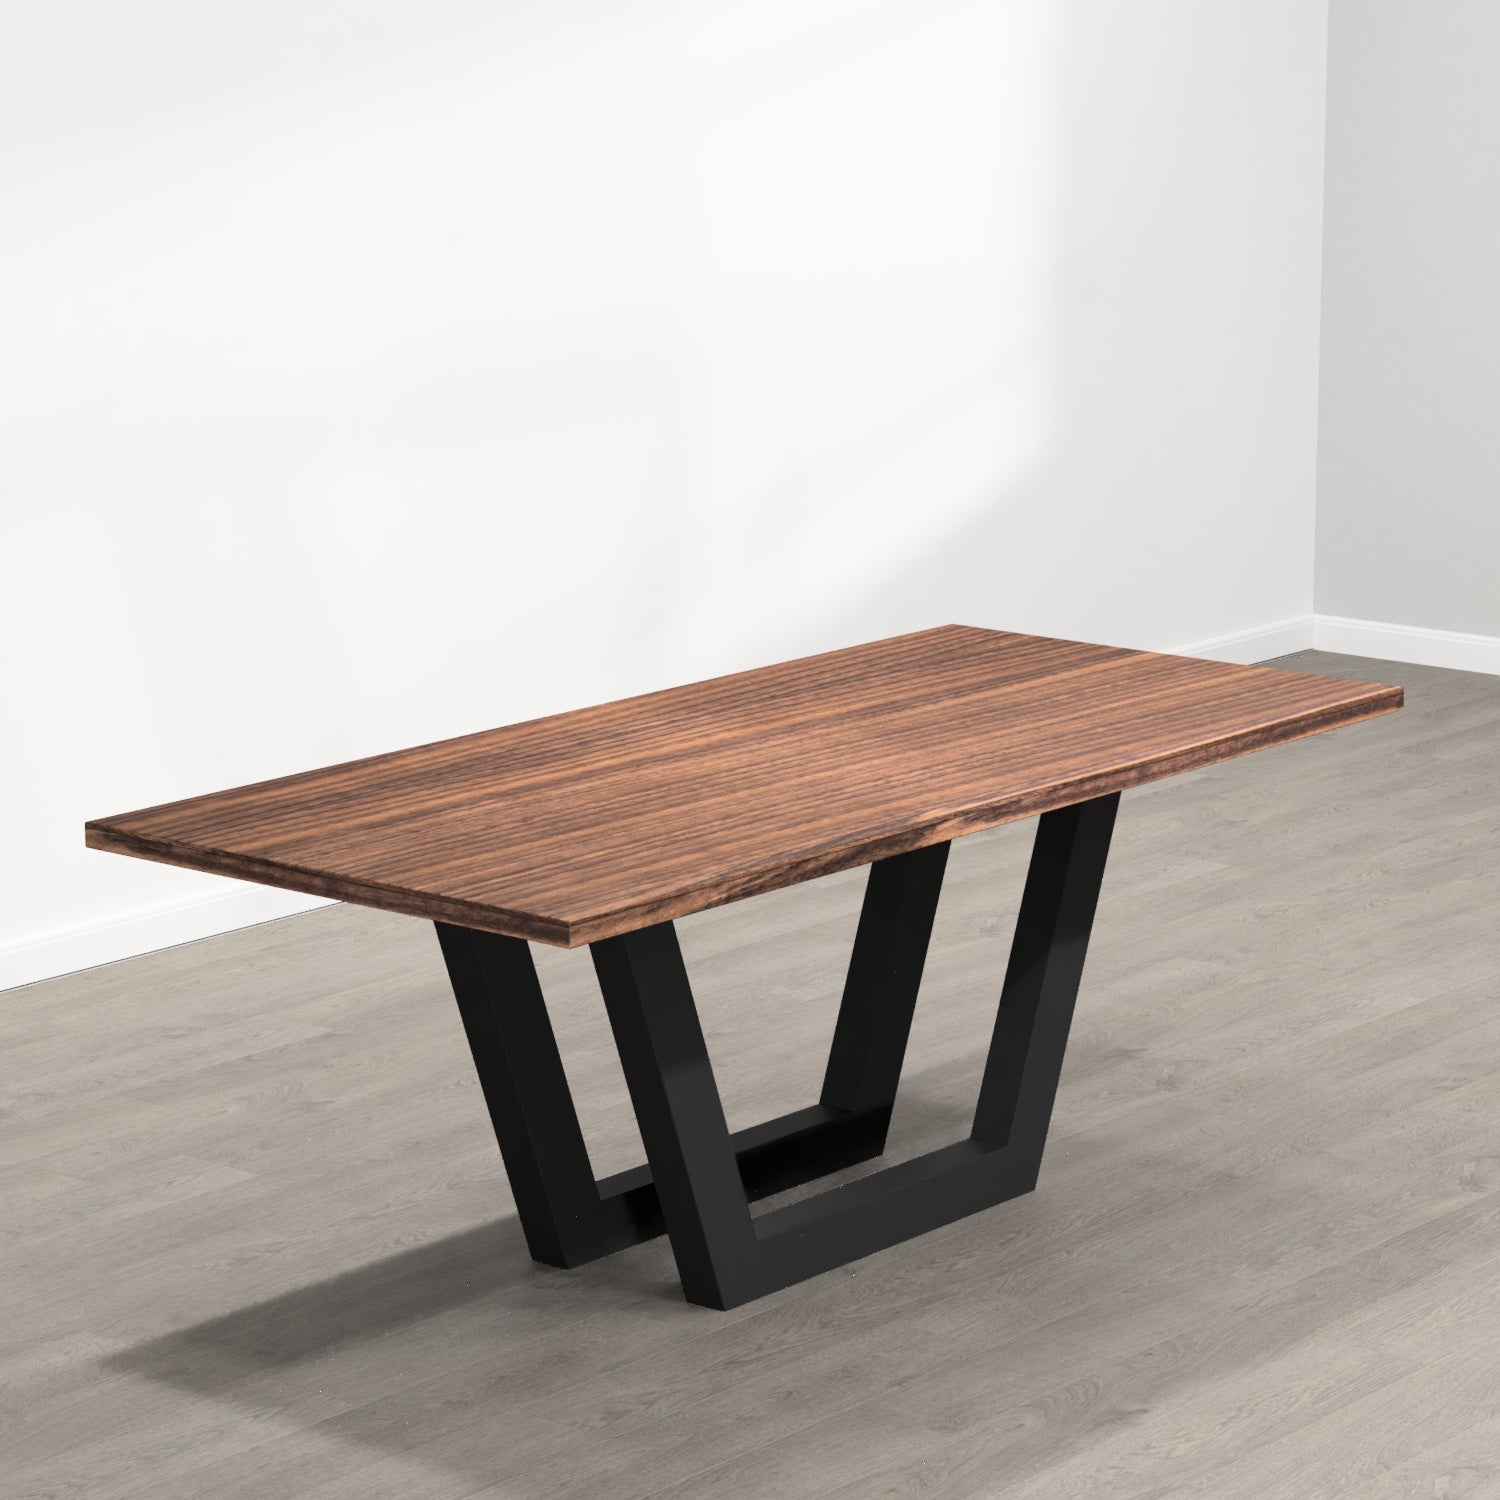 The Addison Dining Table - FargoWoodworks